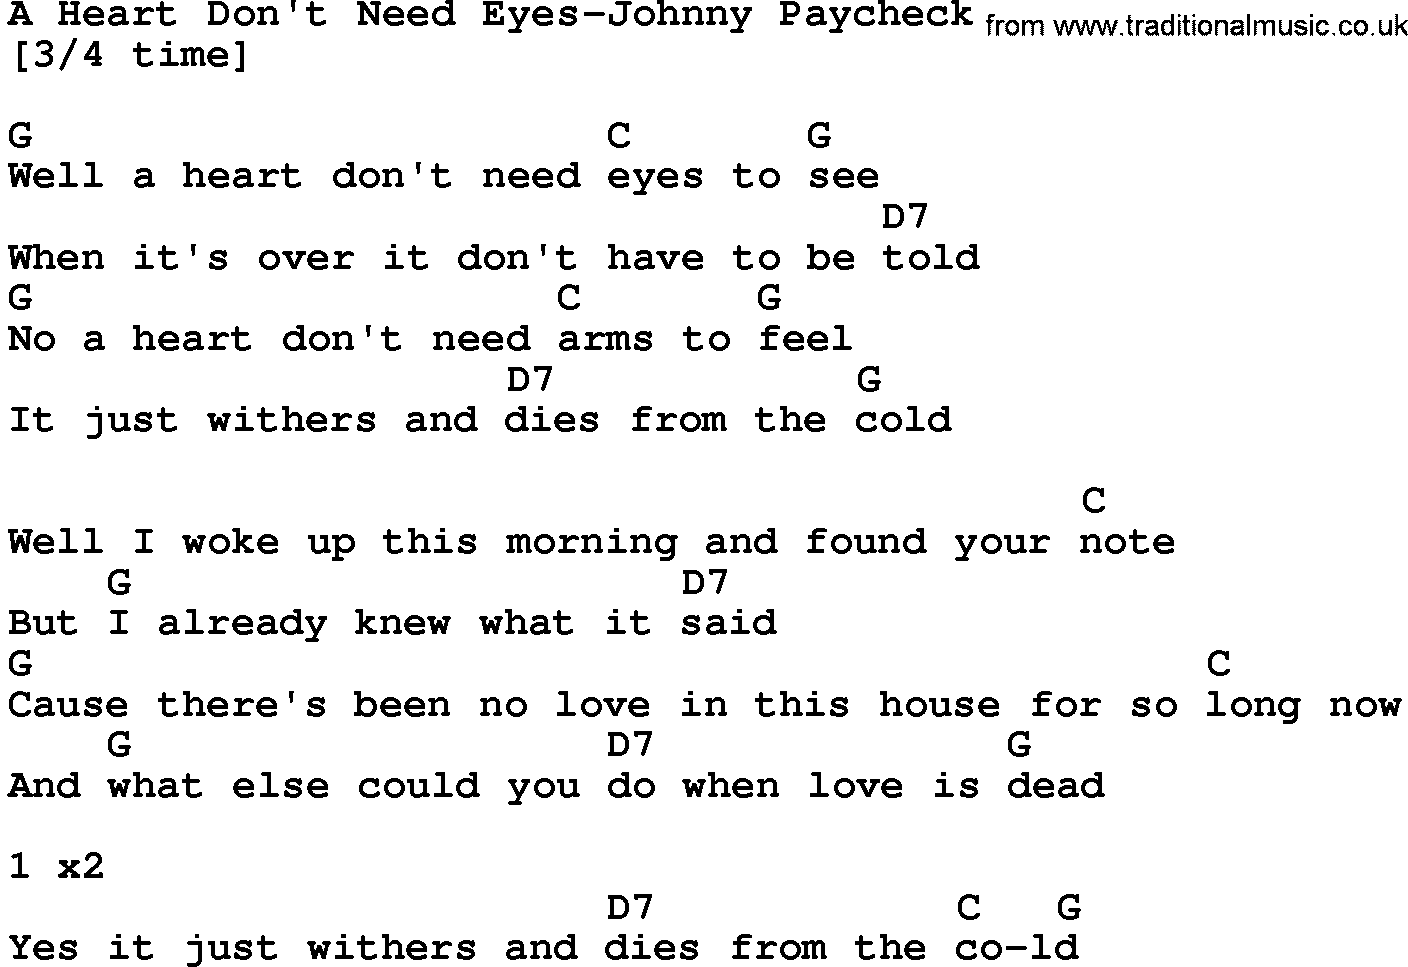 Country music song: A Heart Don't Need Eyes-Johnny Paycheck lyrics and chords